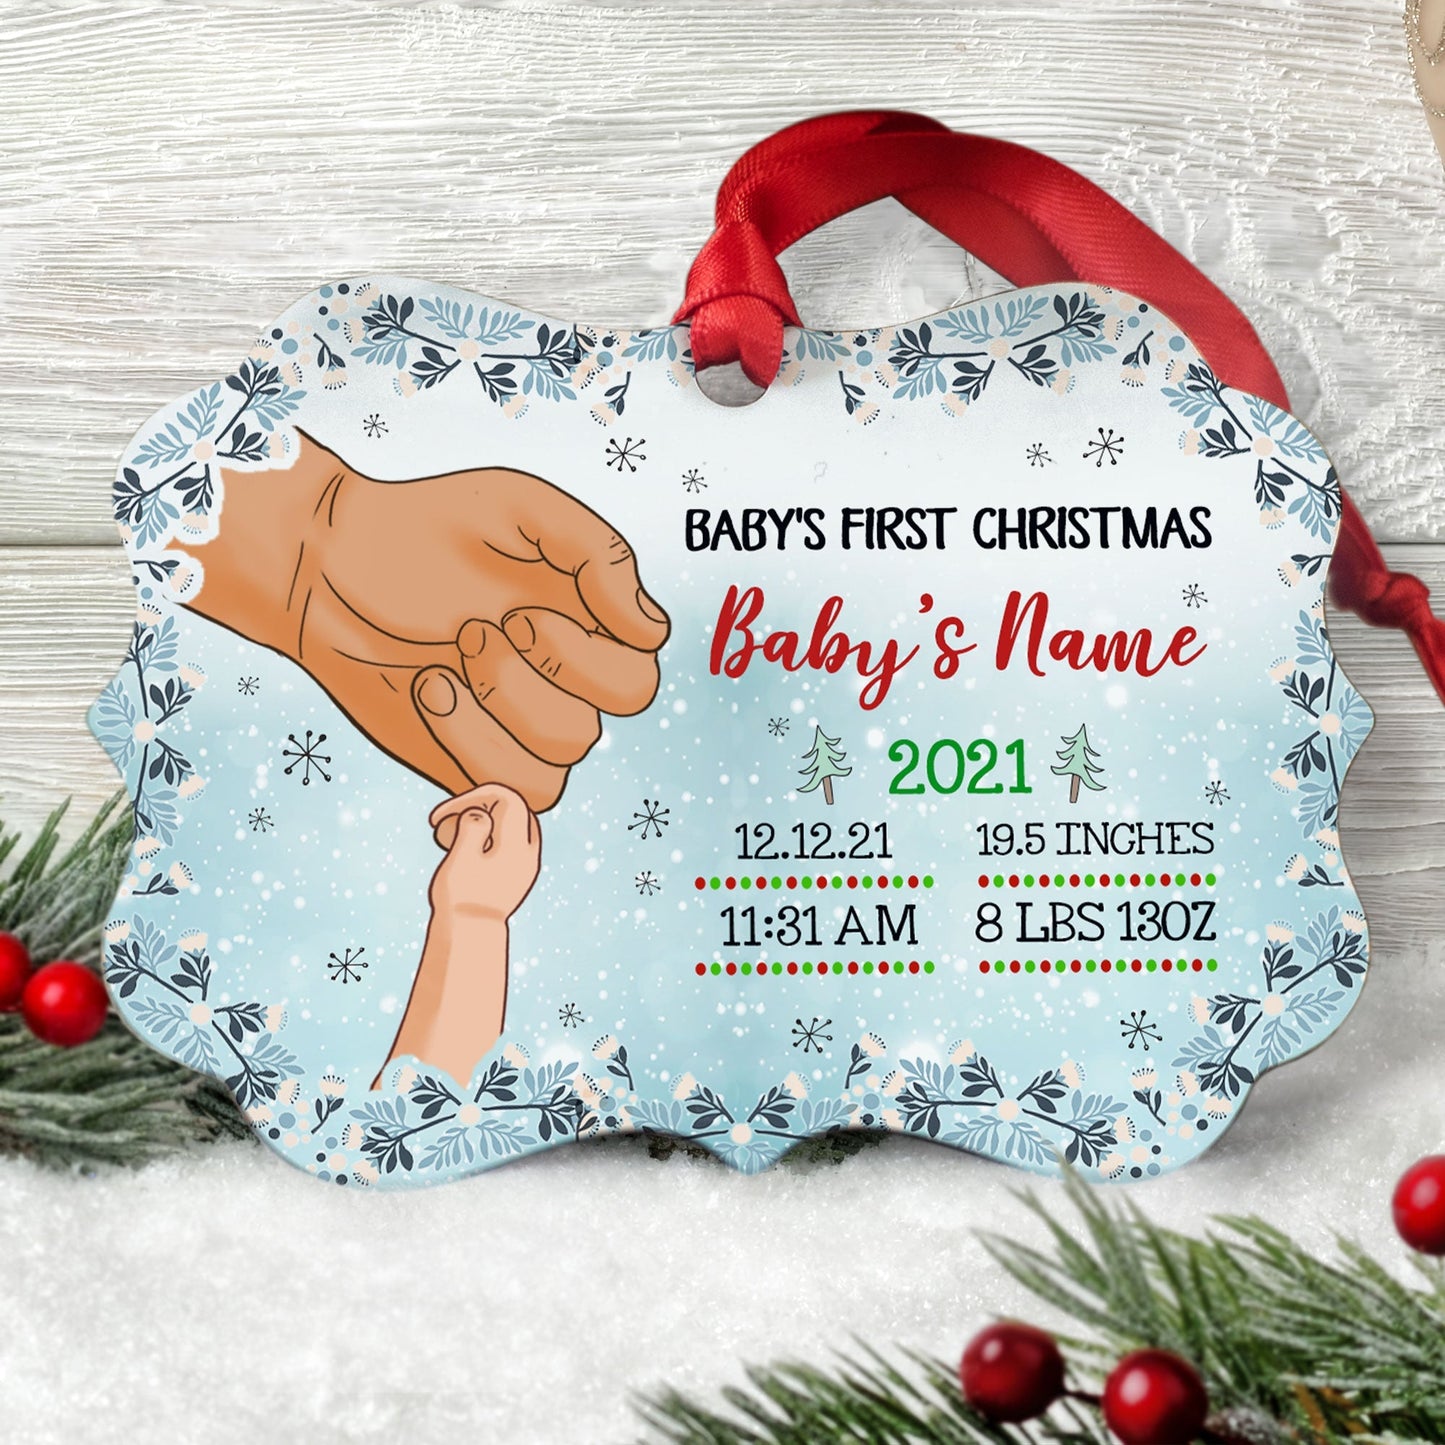 Baby's First Christmas - Personalized Aluminum Ornament - Christmas Gift For Baby